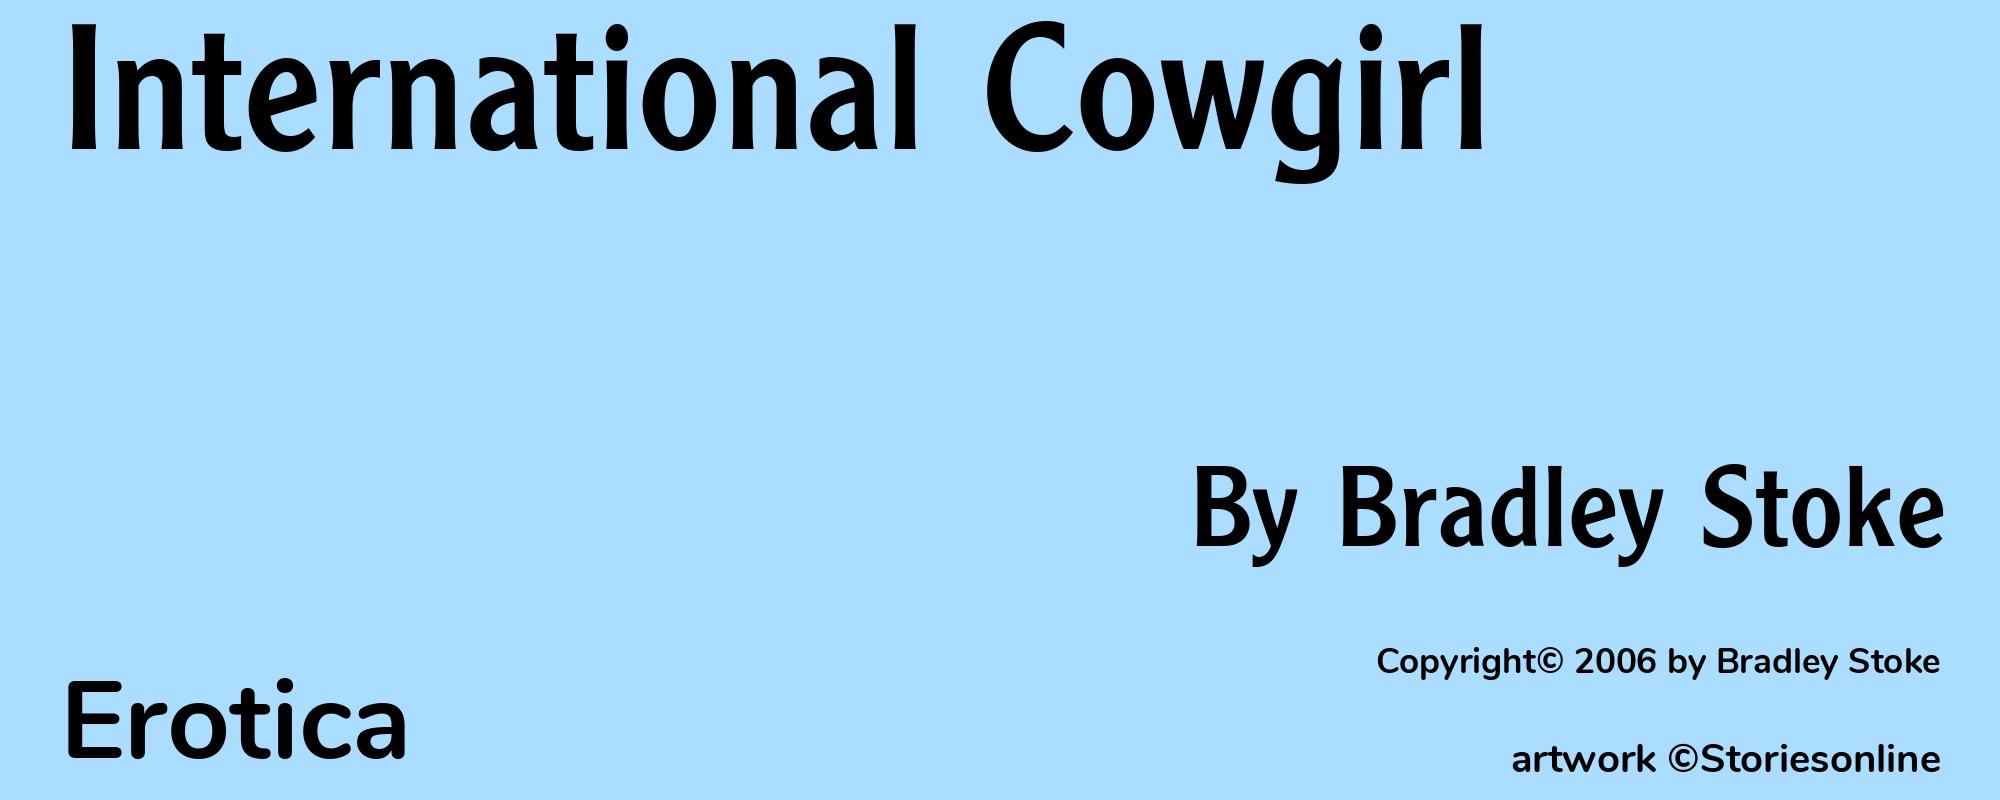 International Cowgirl - Cover